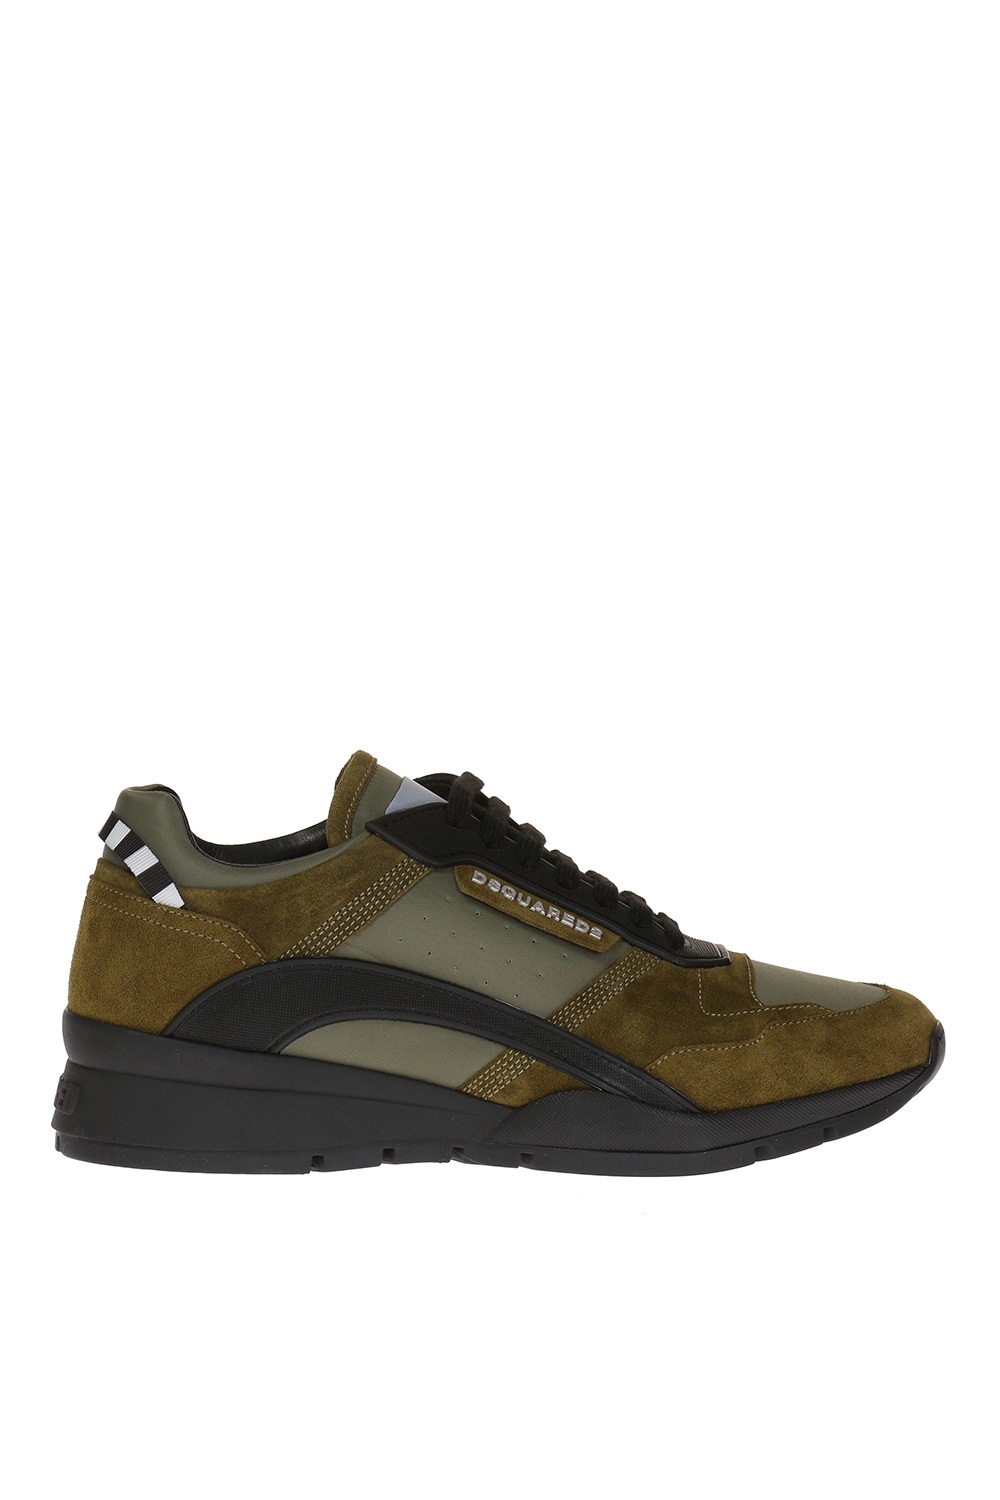 dsquared sneakers kit